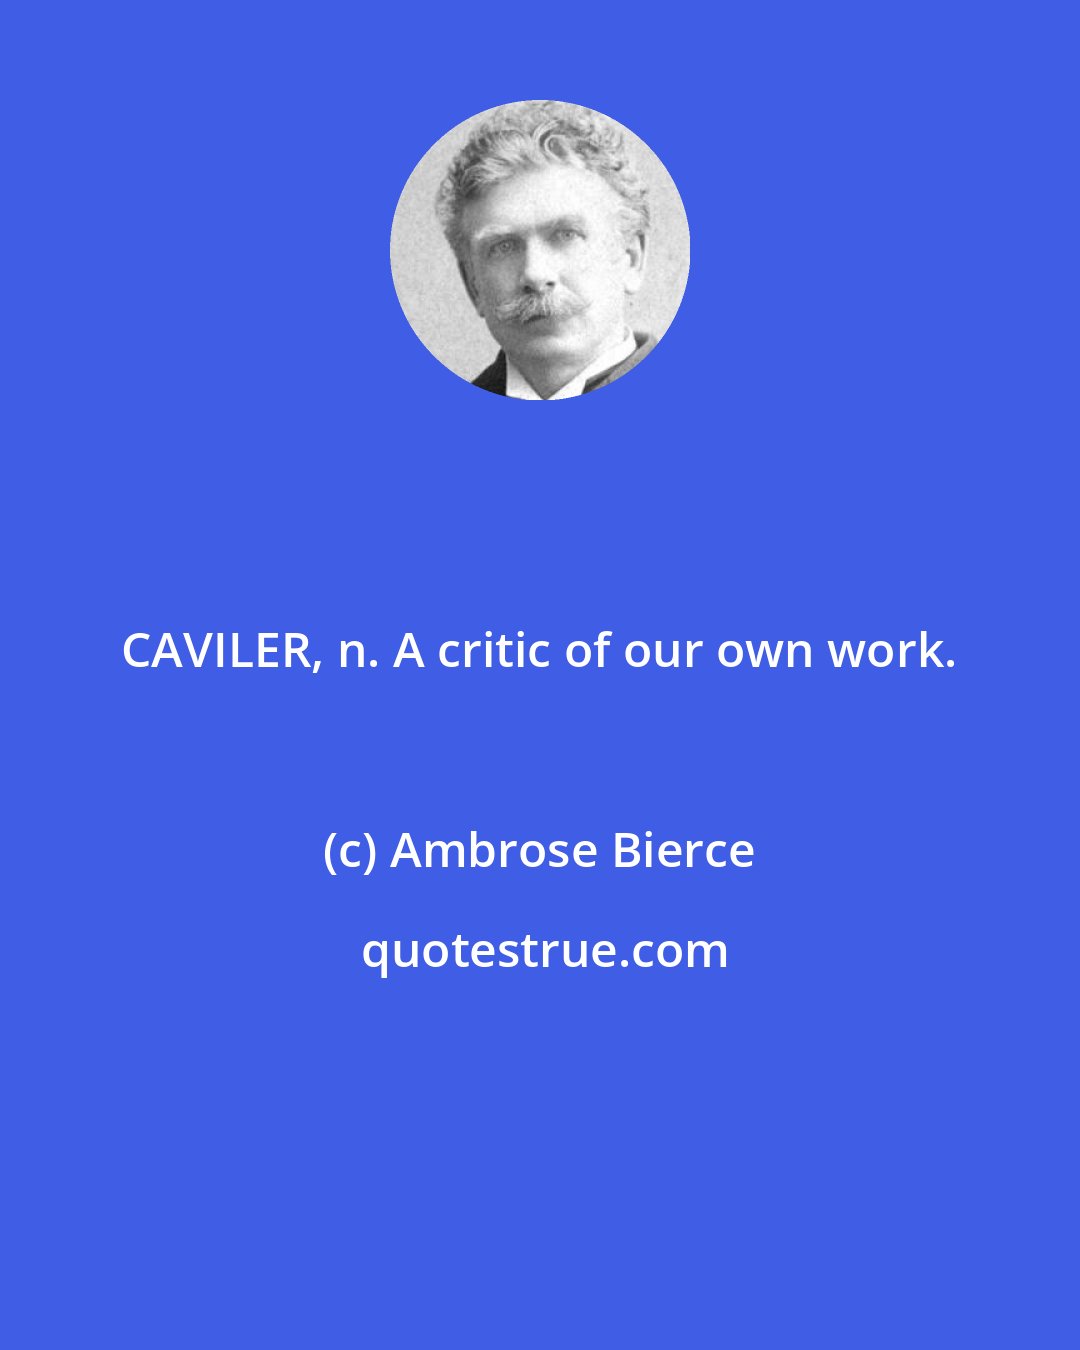 Ambrose Bierce: CAVILER, n. A critic of our own work.